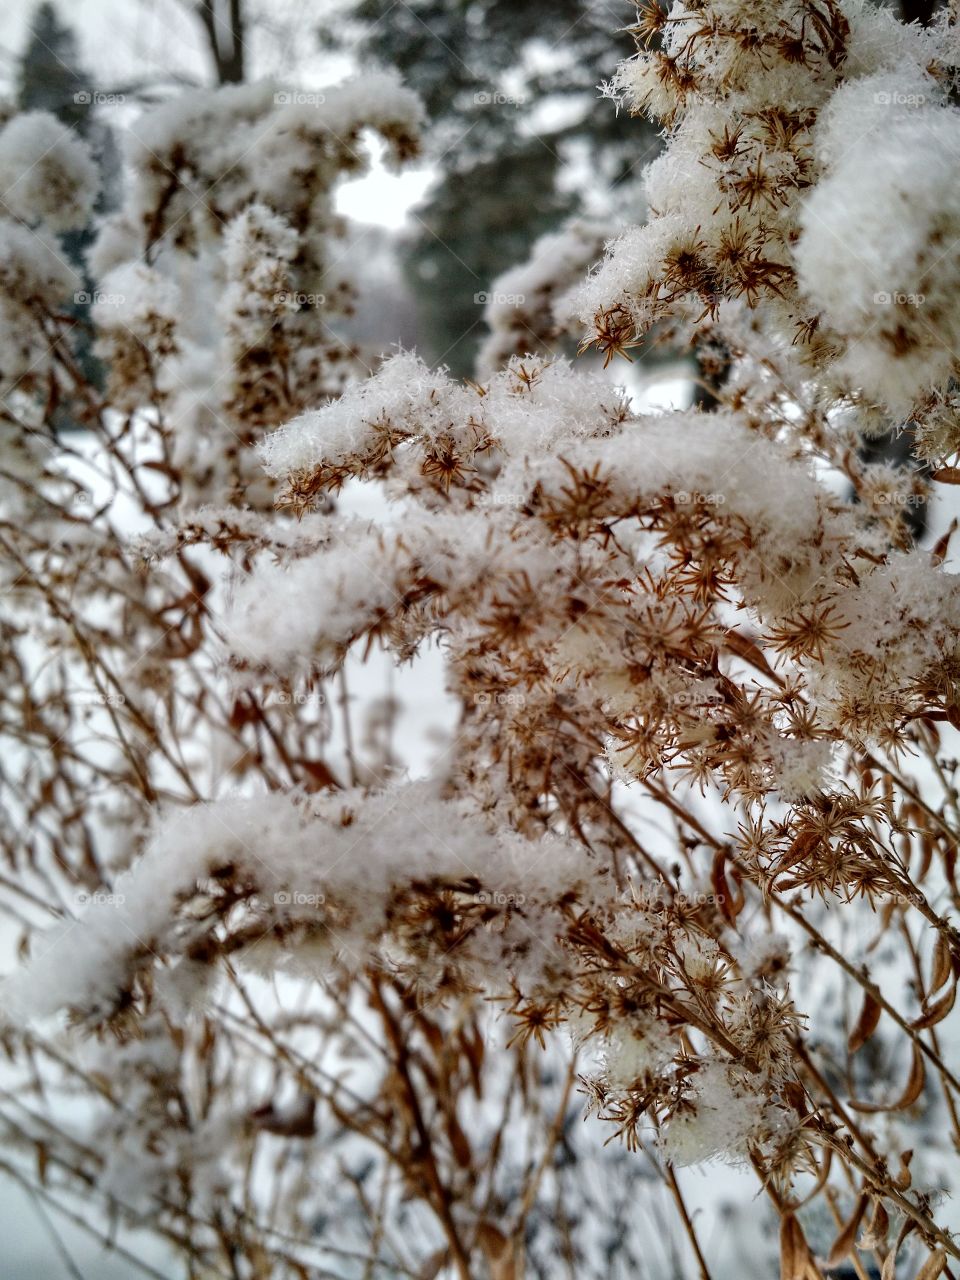 winter weed. snow on dead plant